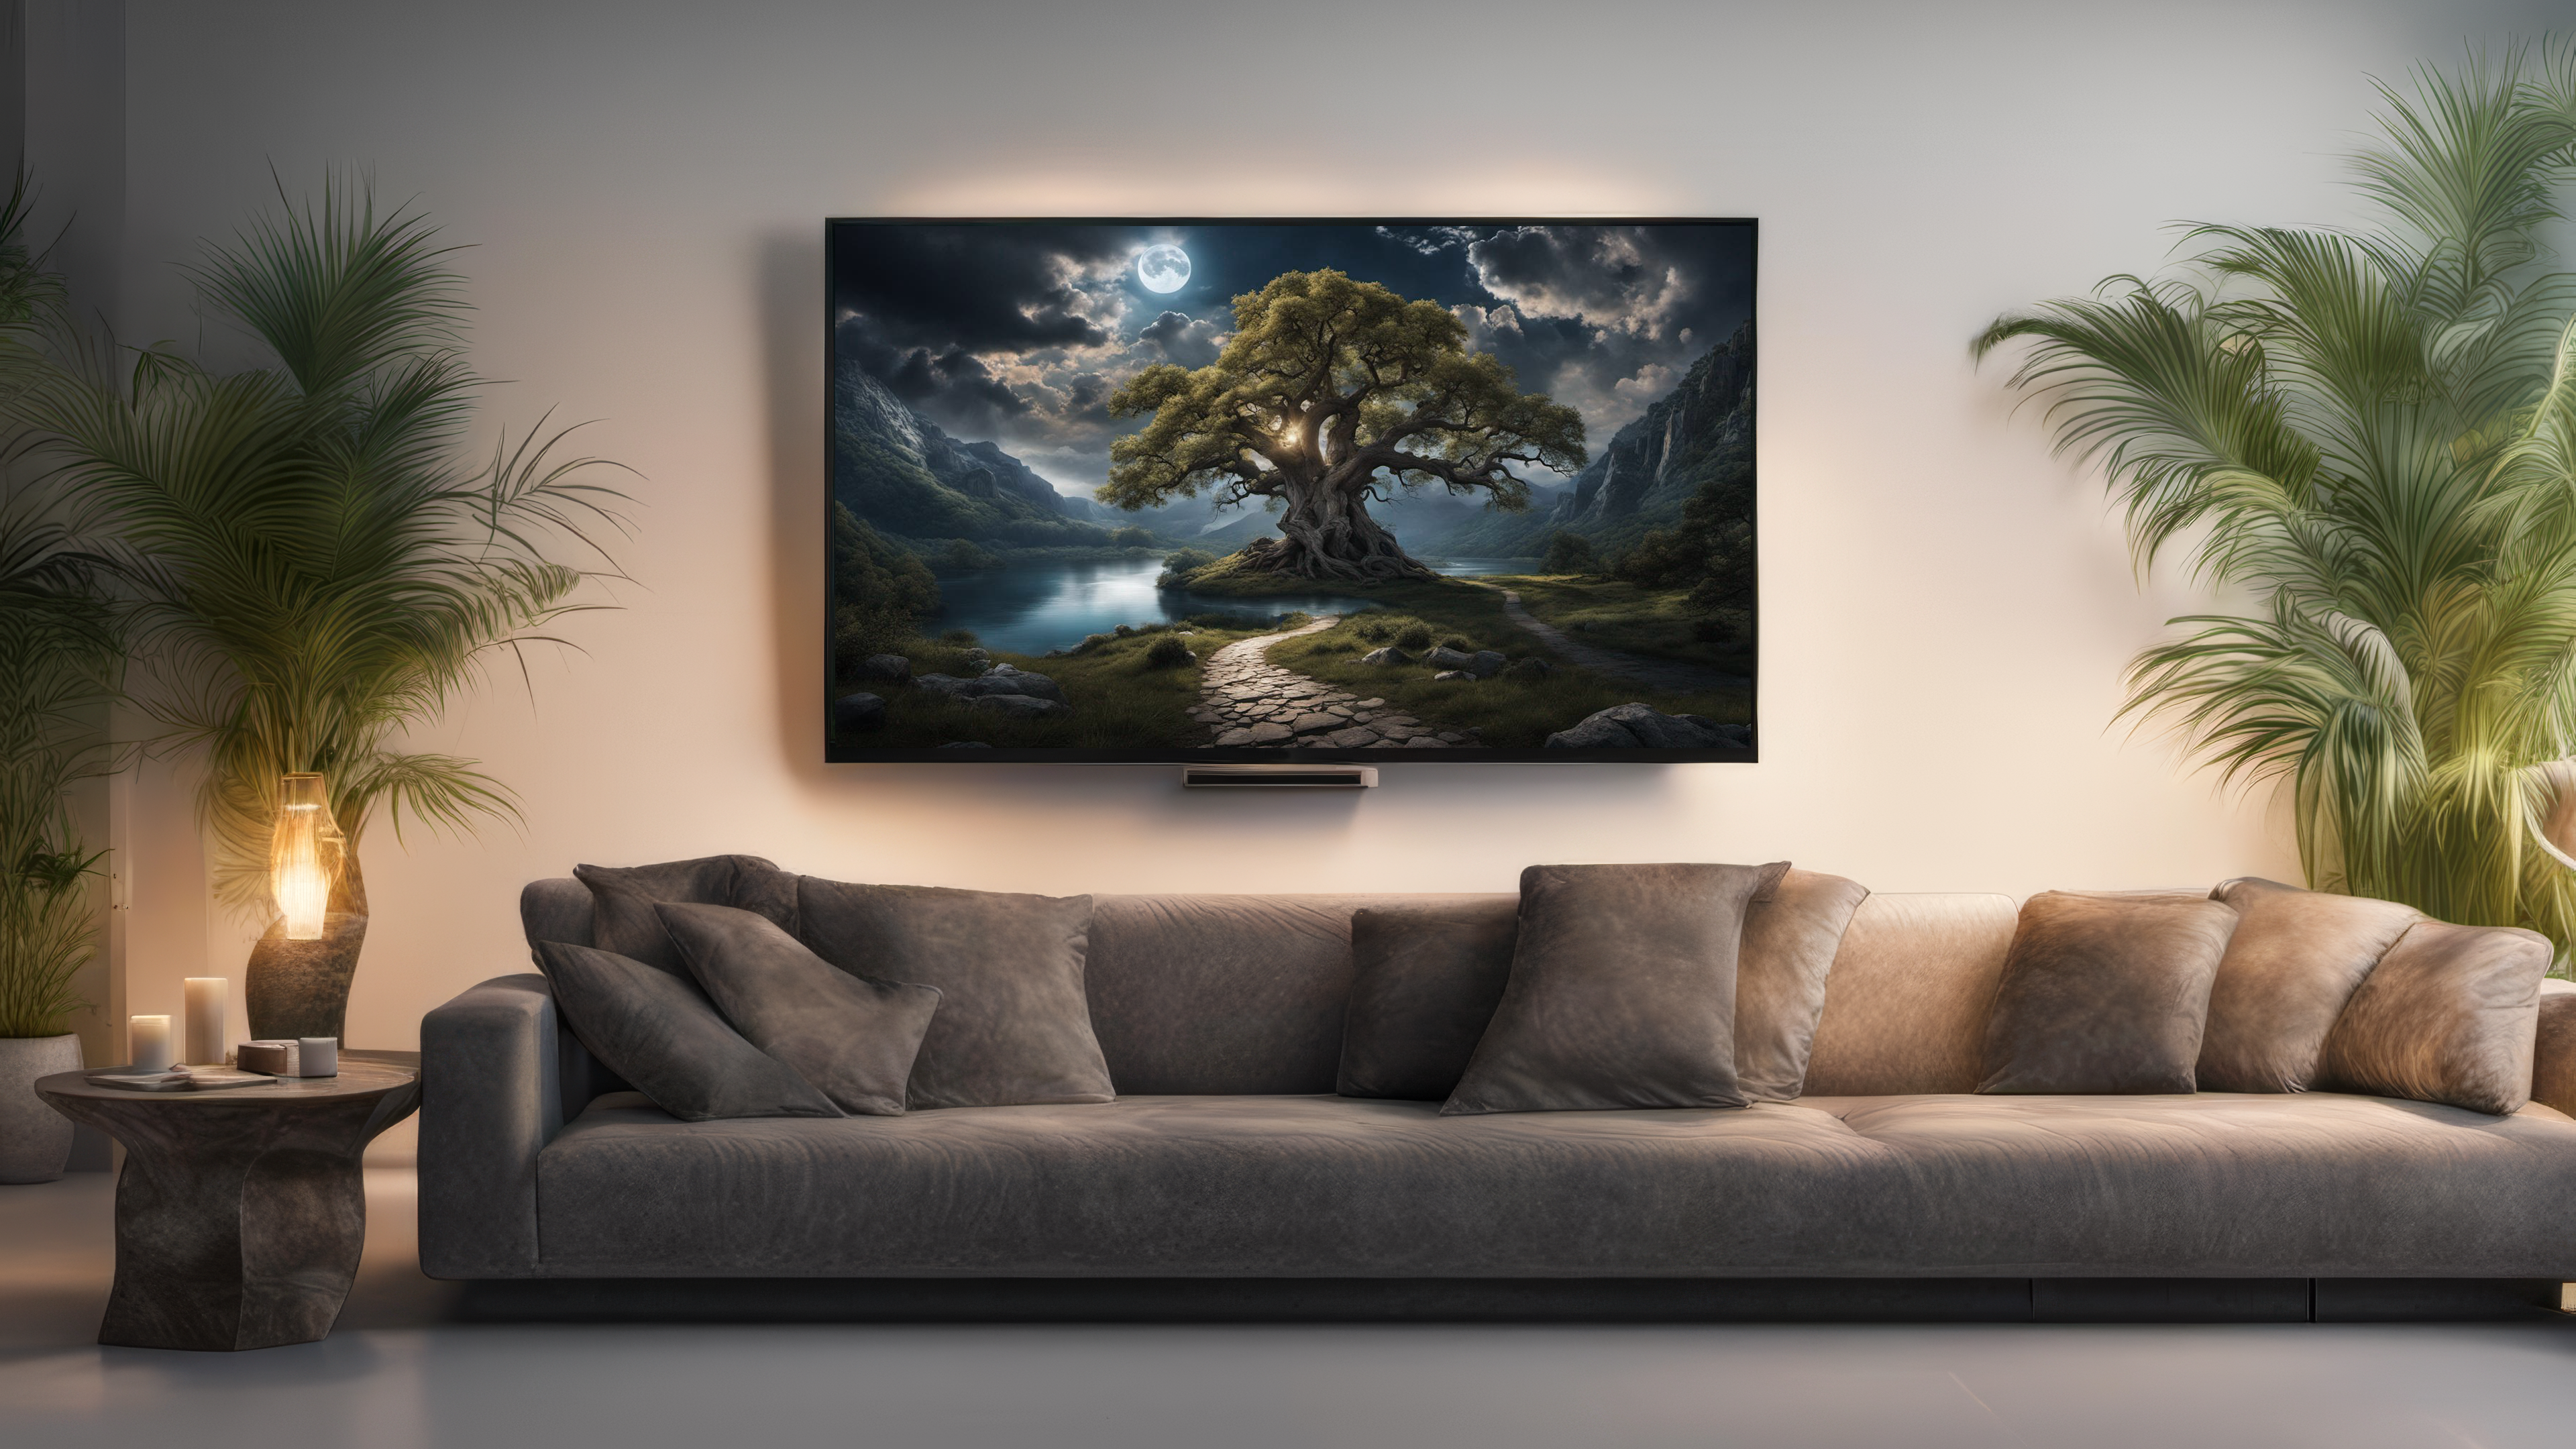 General 3840x2160 AI art living rooms couch plants lamp soft shading interior painting clouds sky full moon moonlight water Moon trees reflection